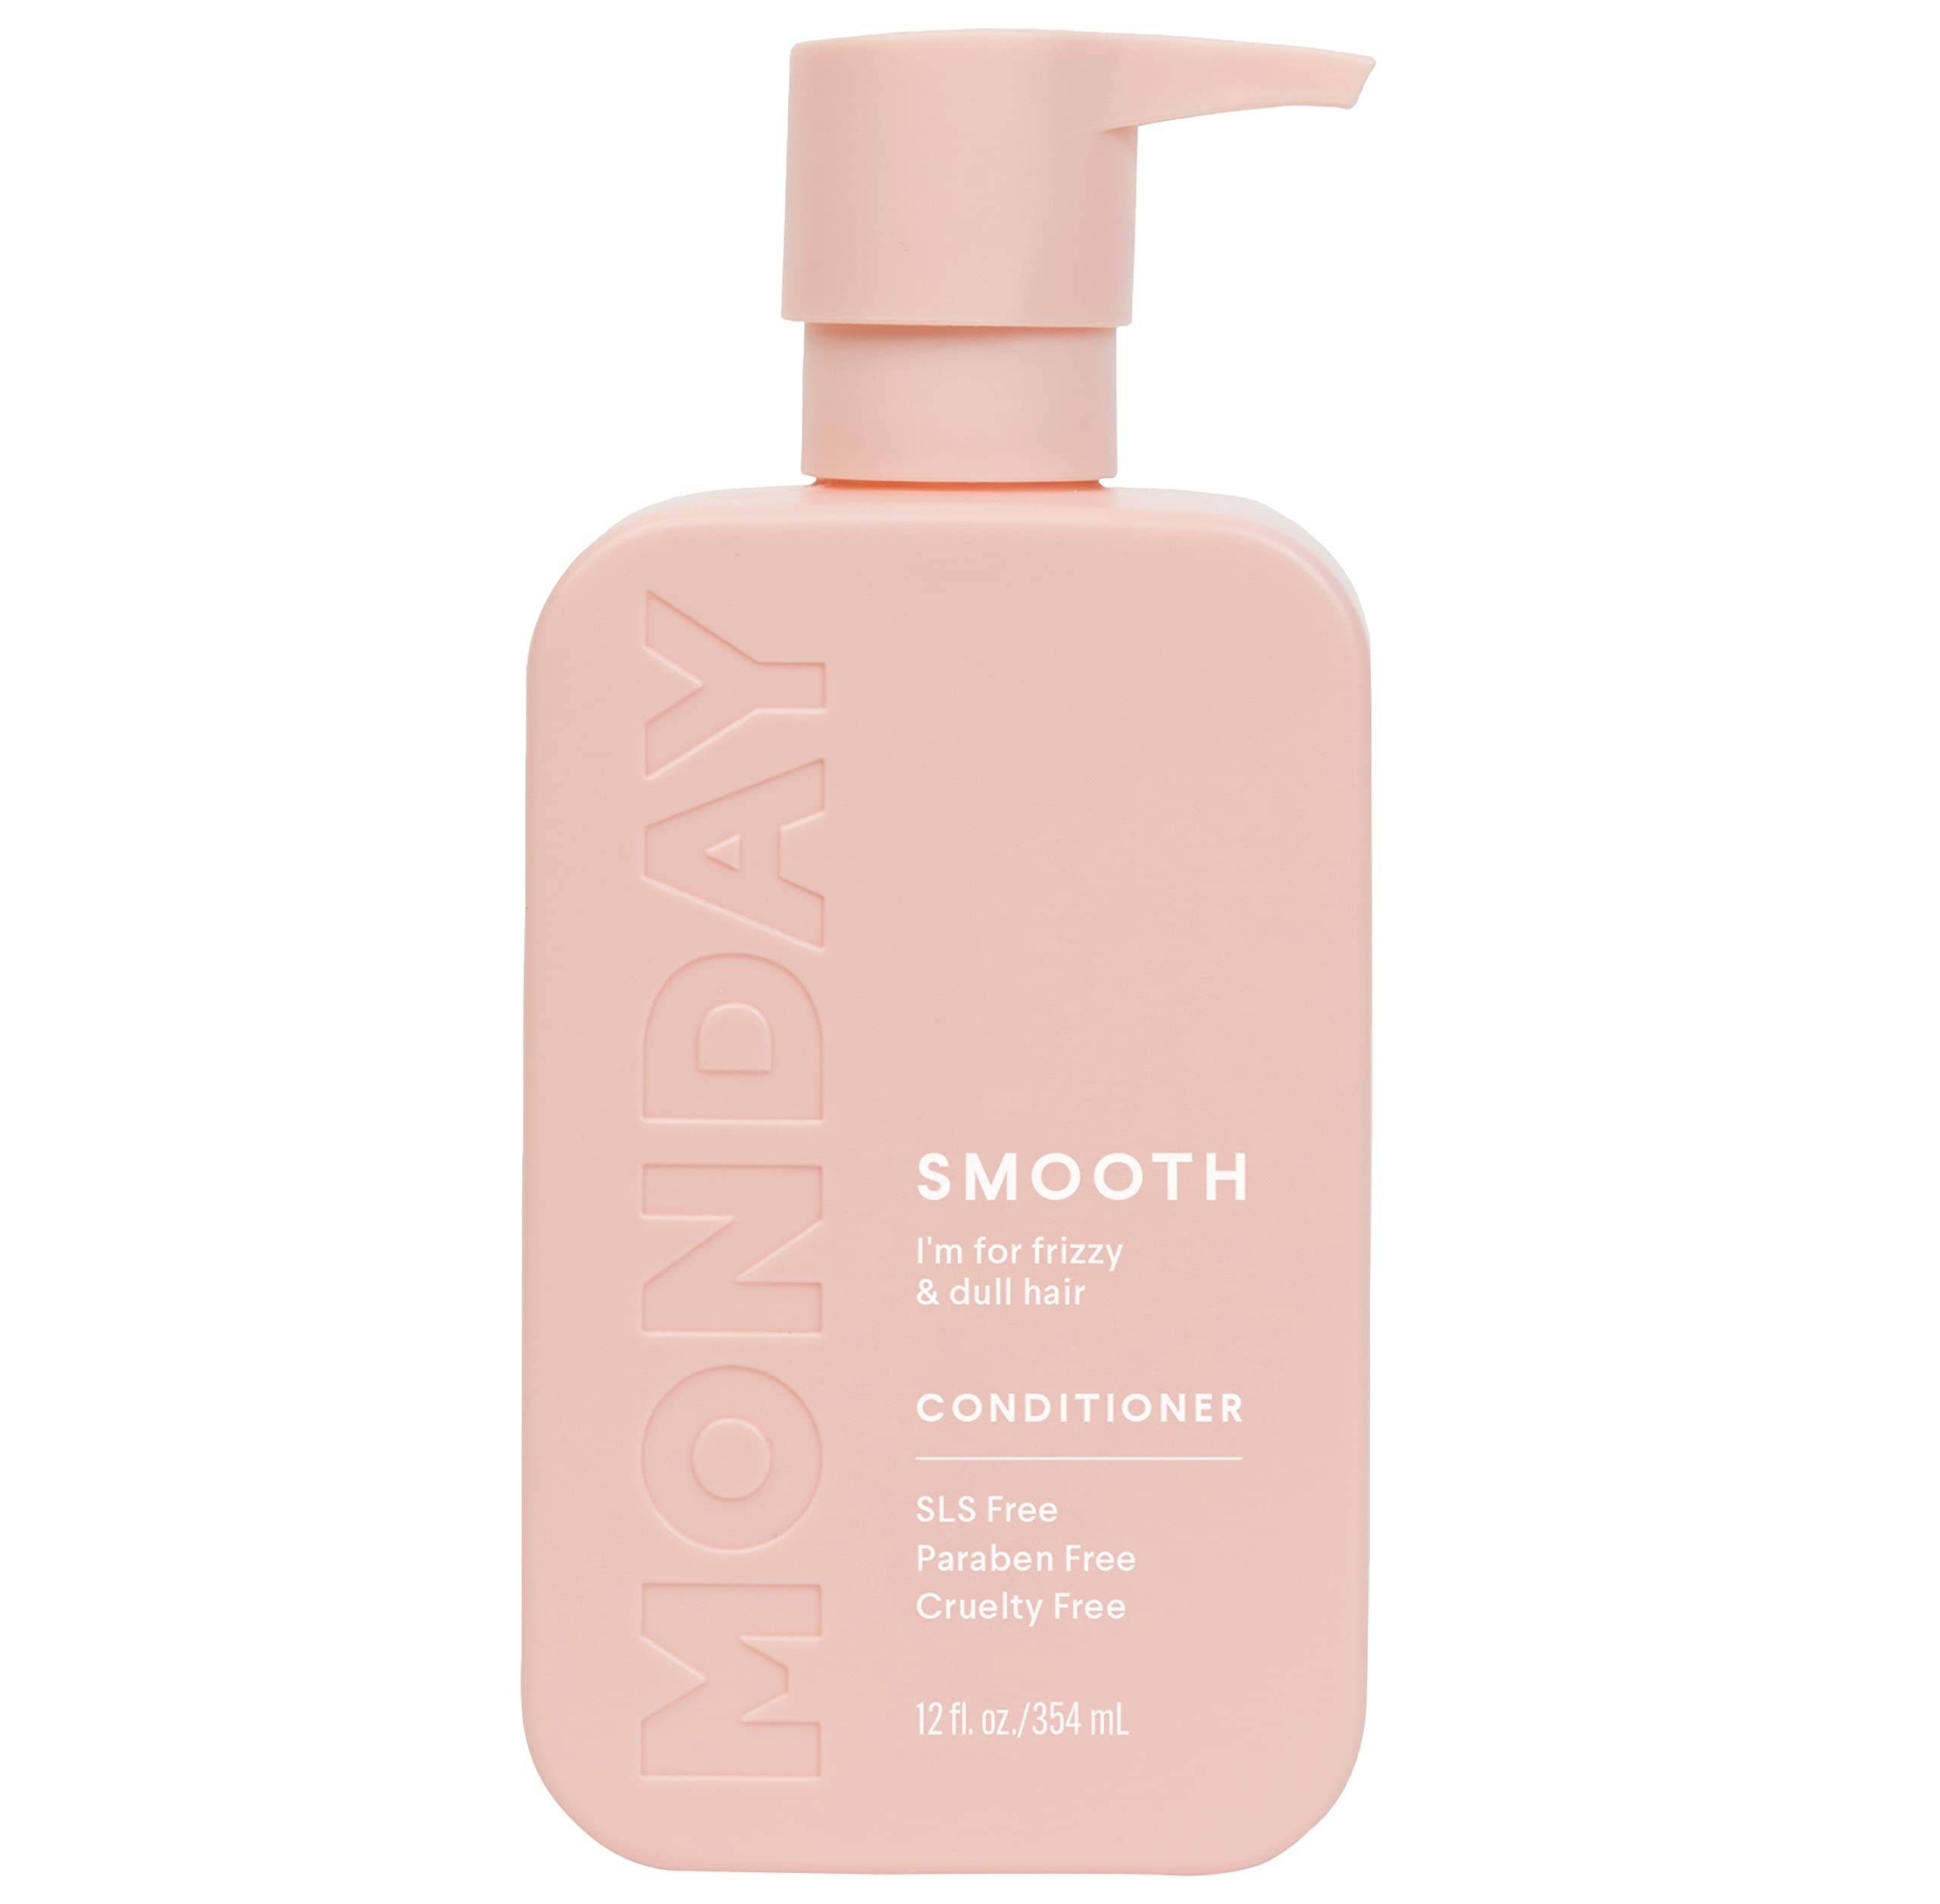 MONDAY HAIRCARE Smooth Conditioner 12oz for Frizzy, Coarse, and Curly Hair, Made from Coconut Oil, Shea Butter, & Vitamin E, 100% Recyclable Bottles (350ml), Pink (10433)